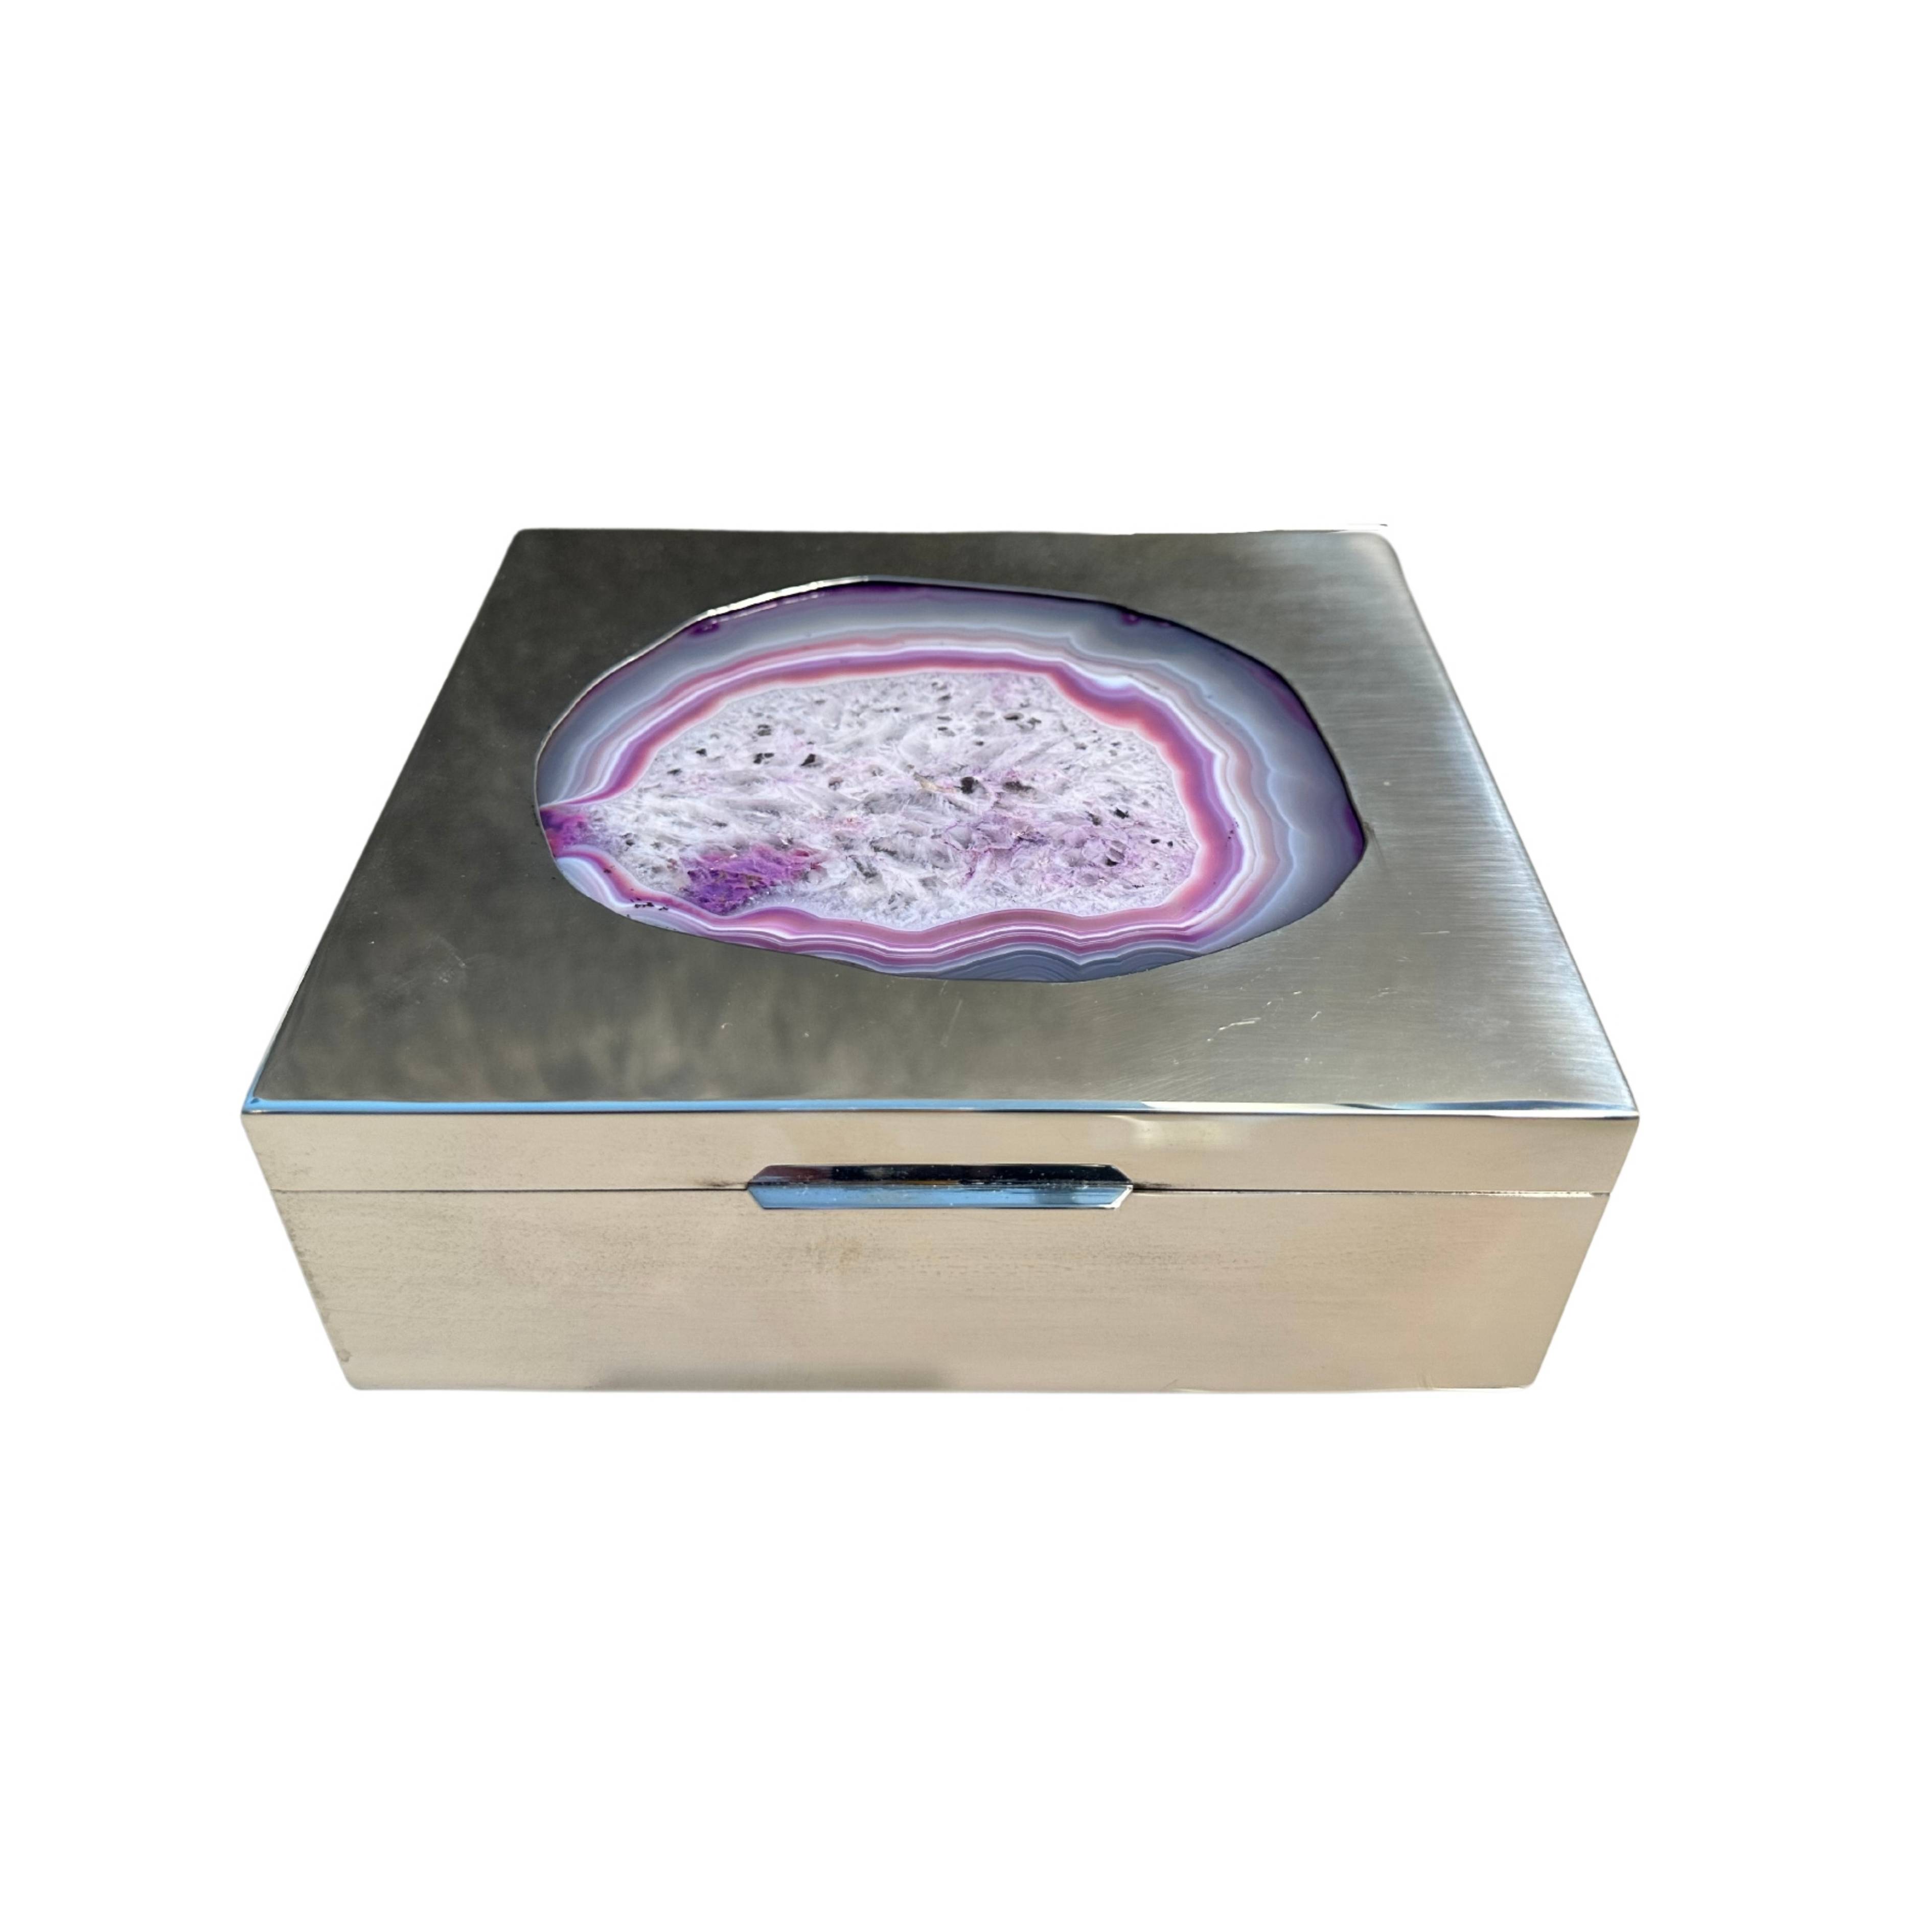 Handmade 925 sterling silver box with rose agate and wooden interior